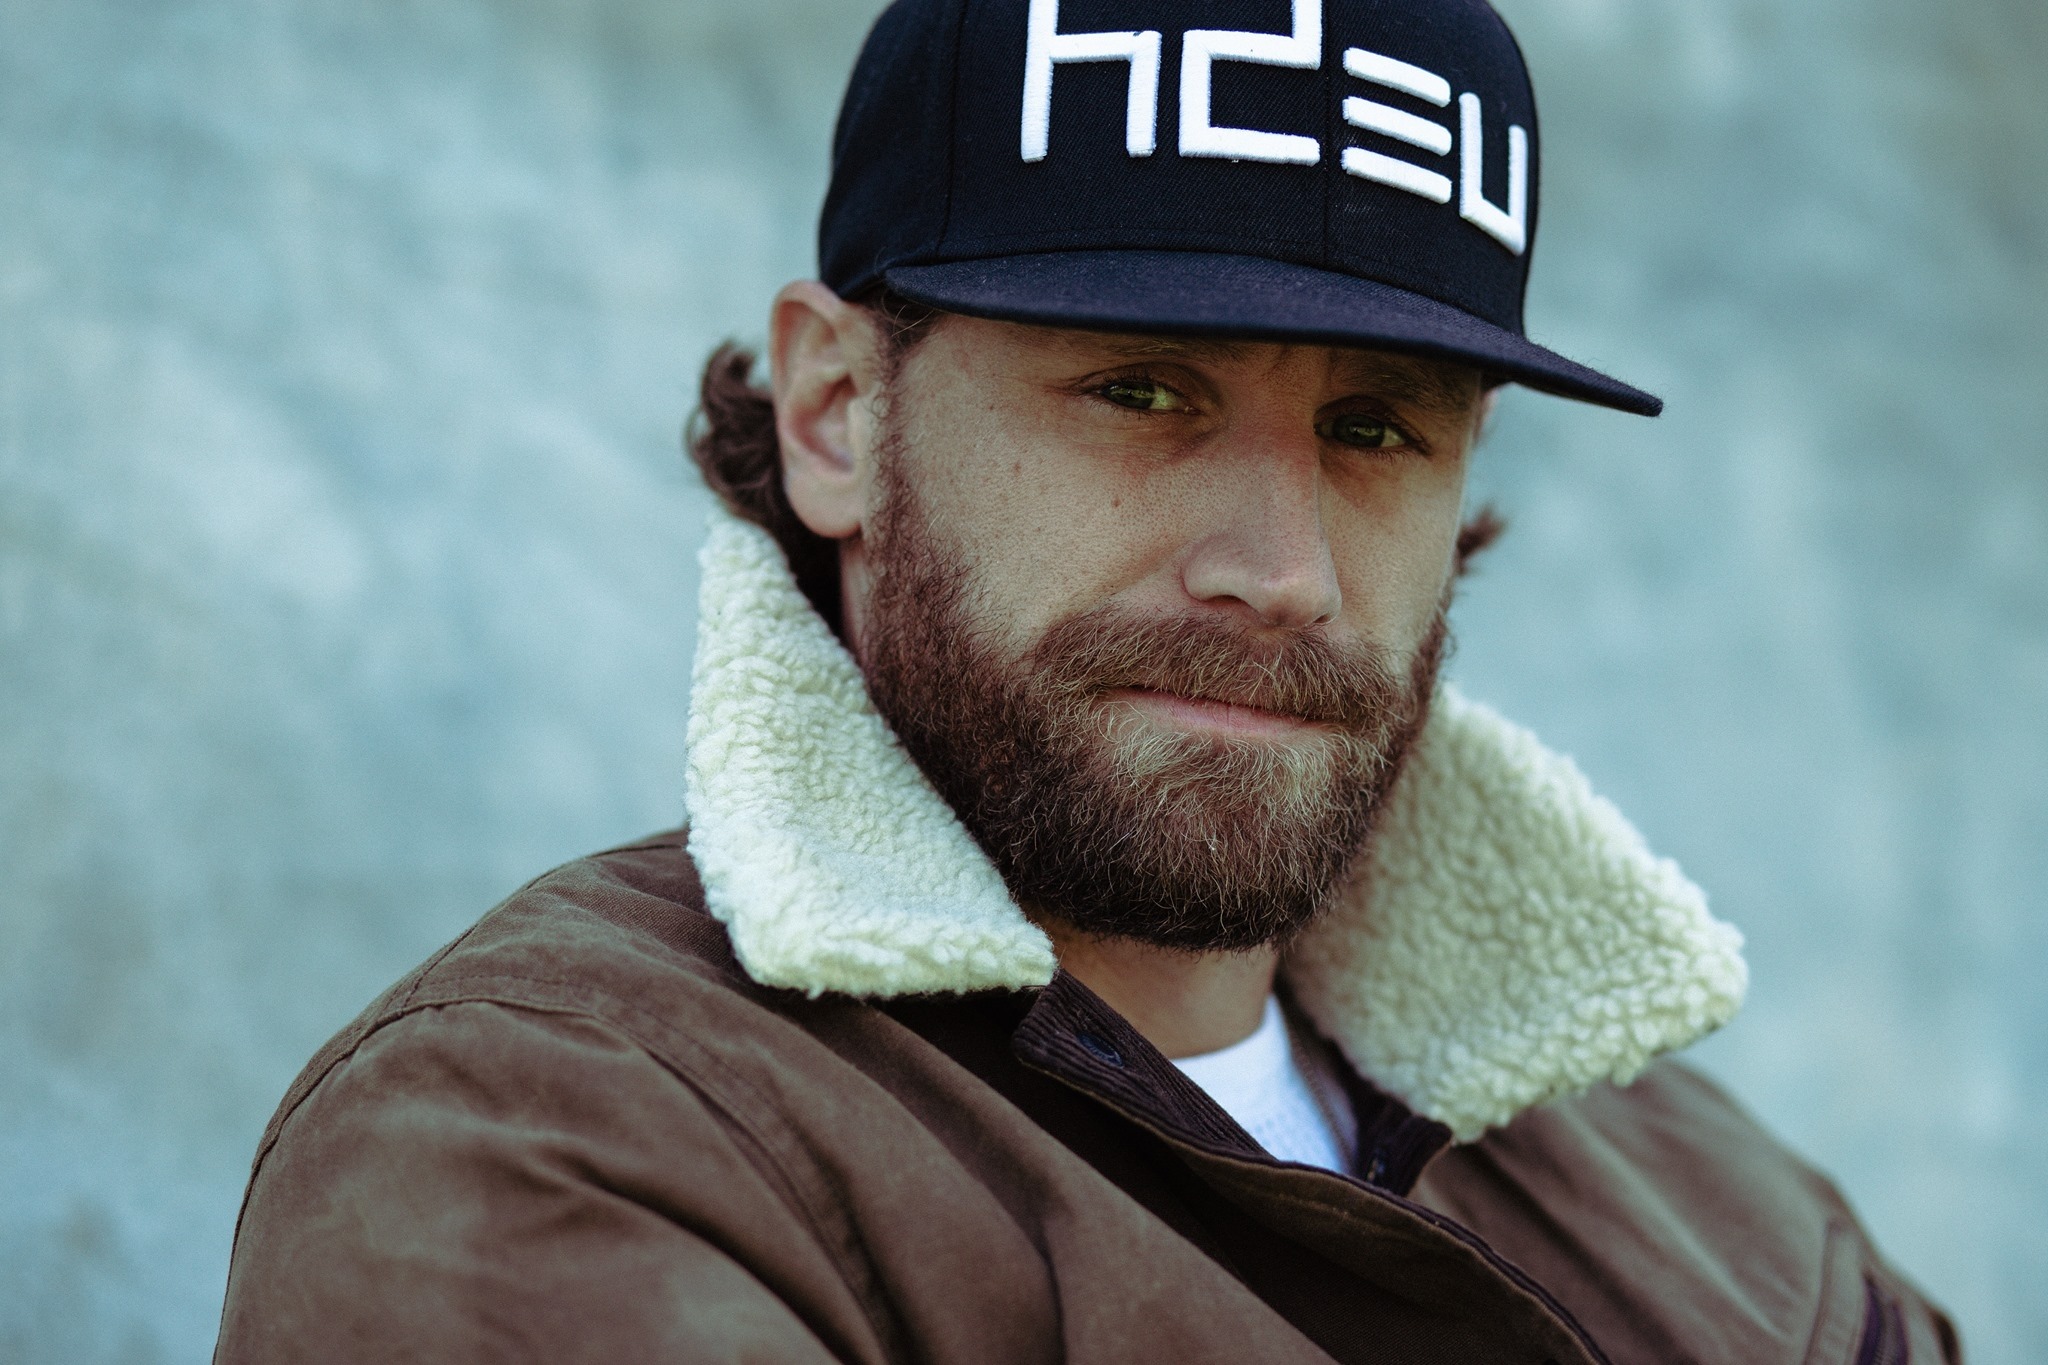 Listen For Your Chance to Win Tickets to See Chase Rice